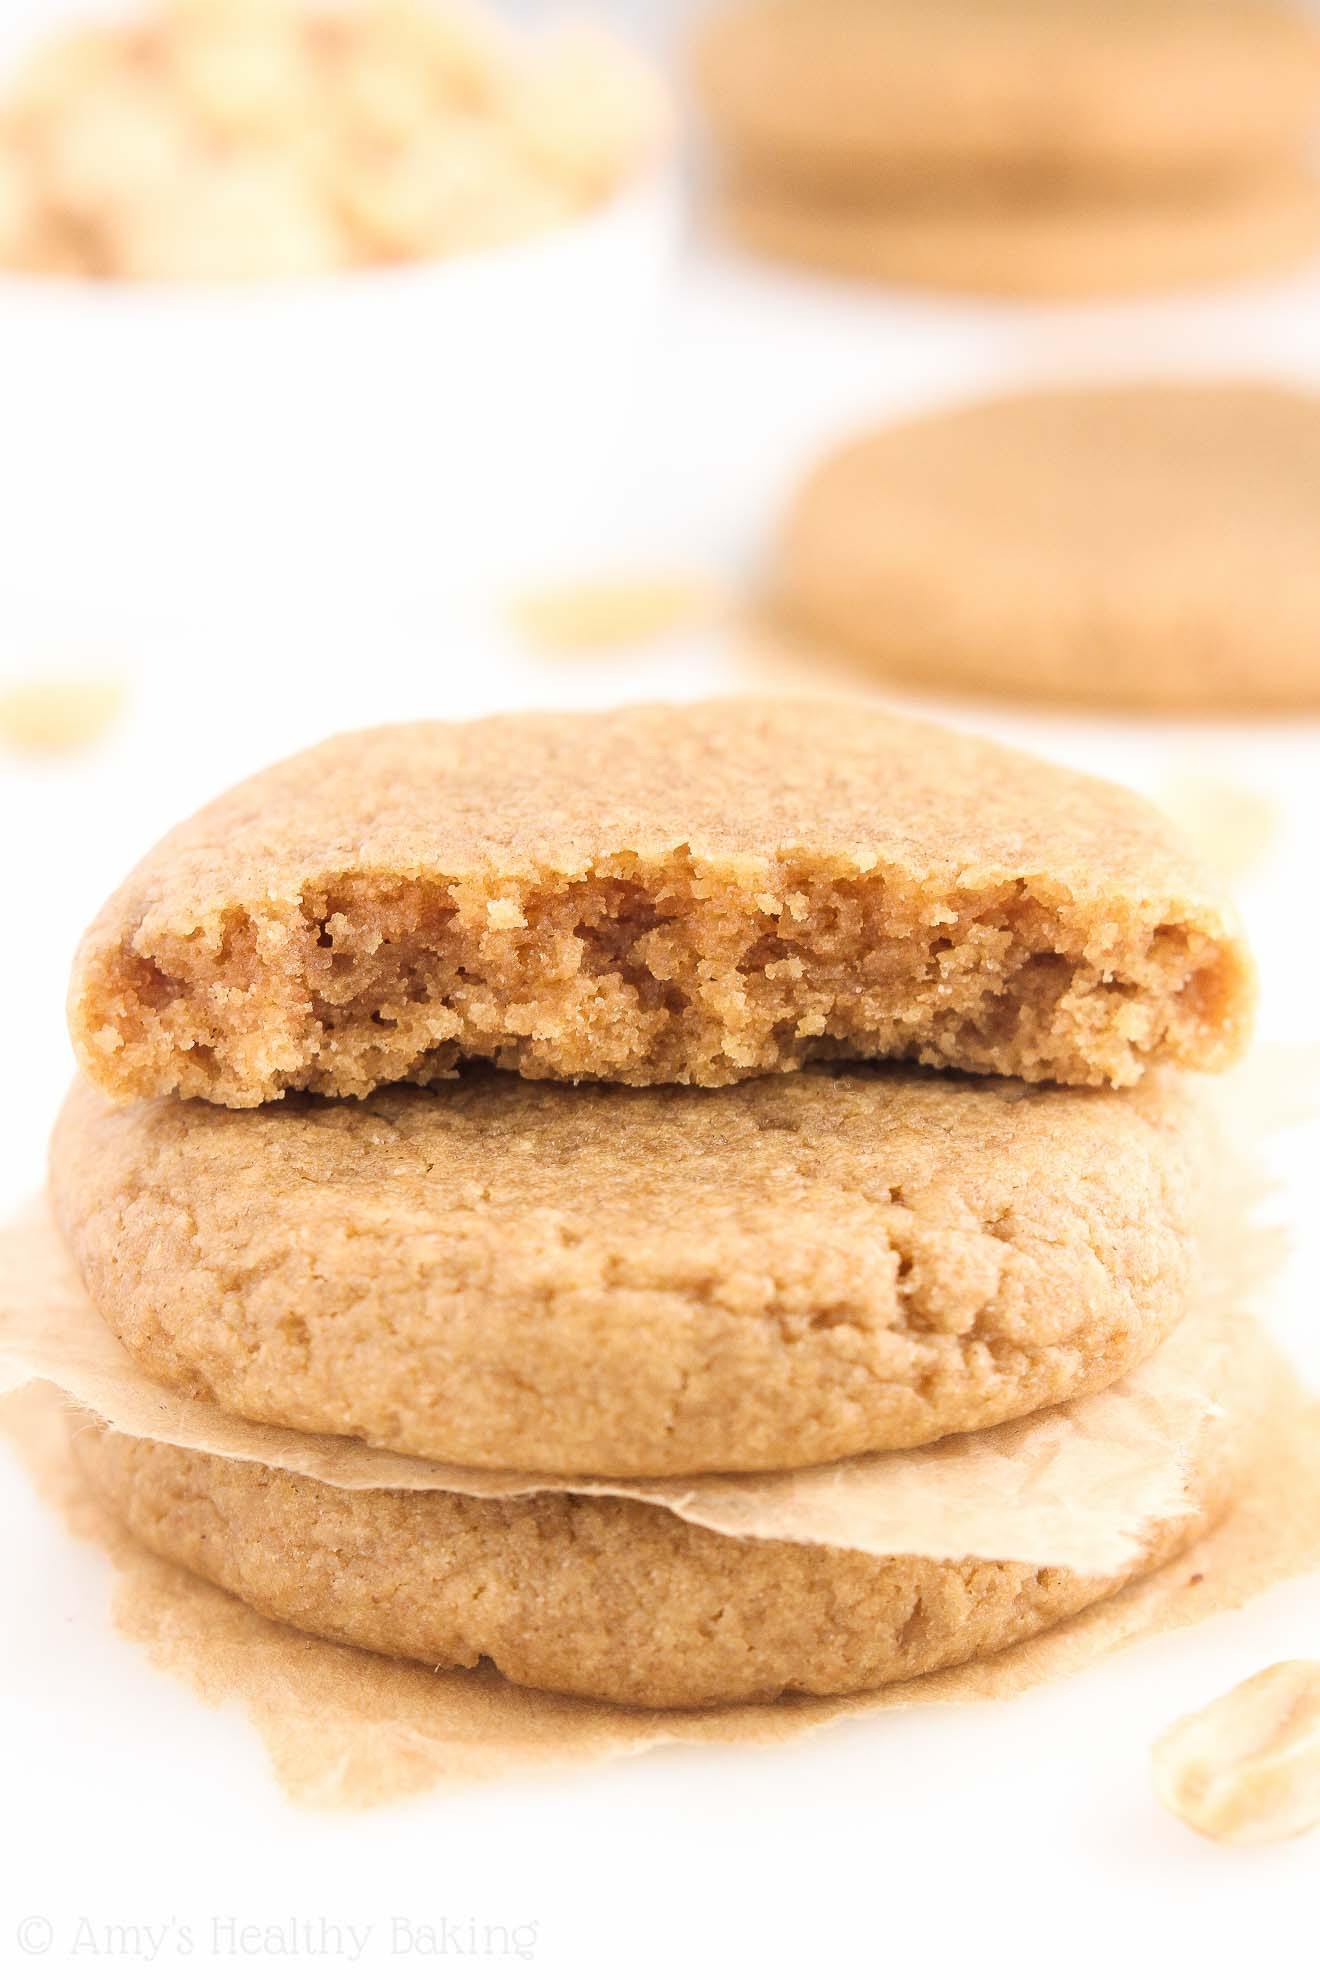 Are Peanut Butter Cookies Healthy
 VIDEO The Ultimate Healthy Soft & Chewy Peanut Butter